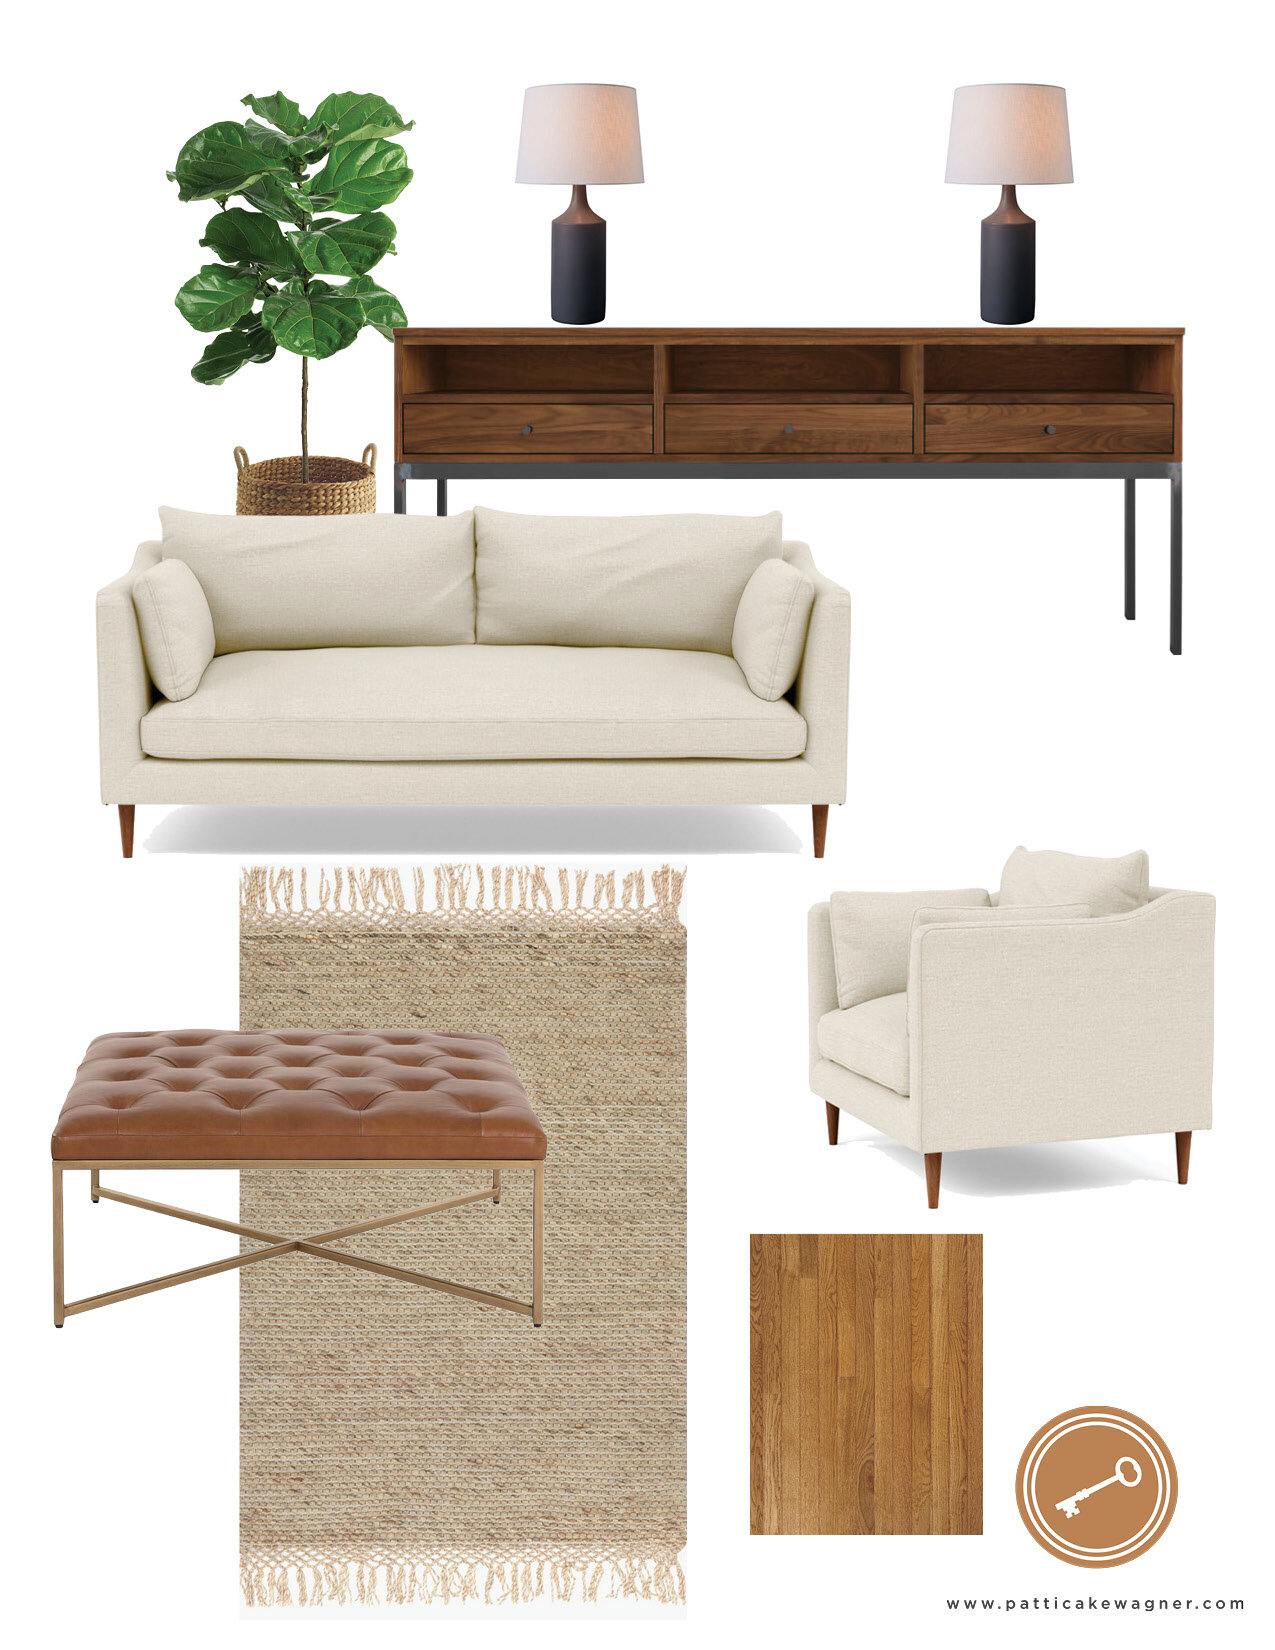 Our Living Room Style Guide